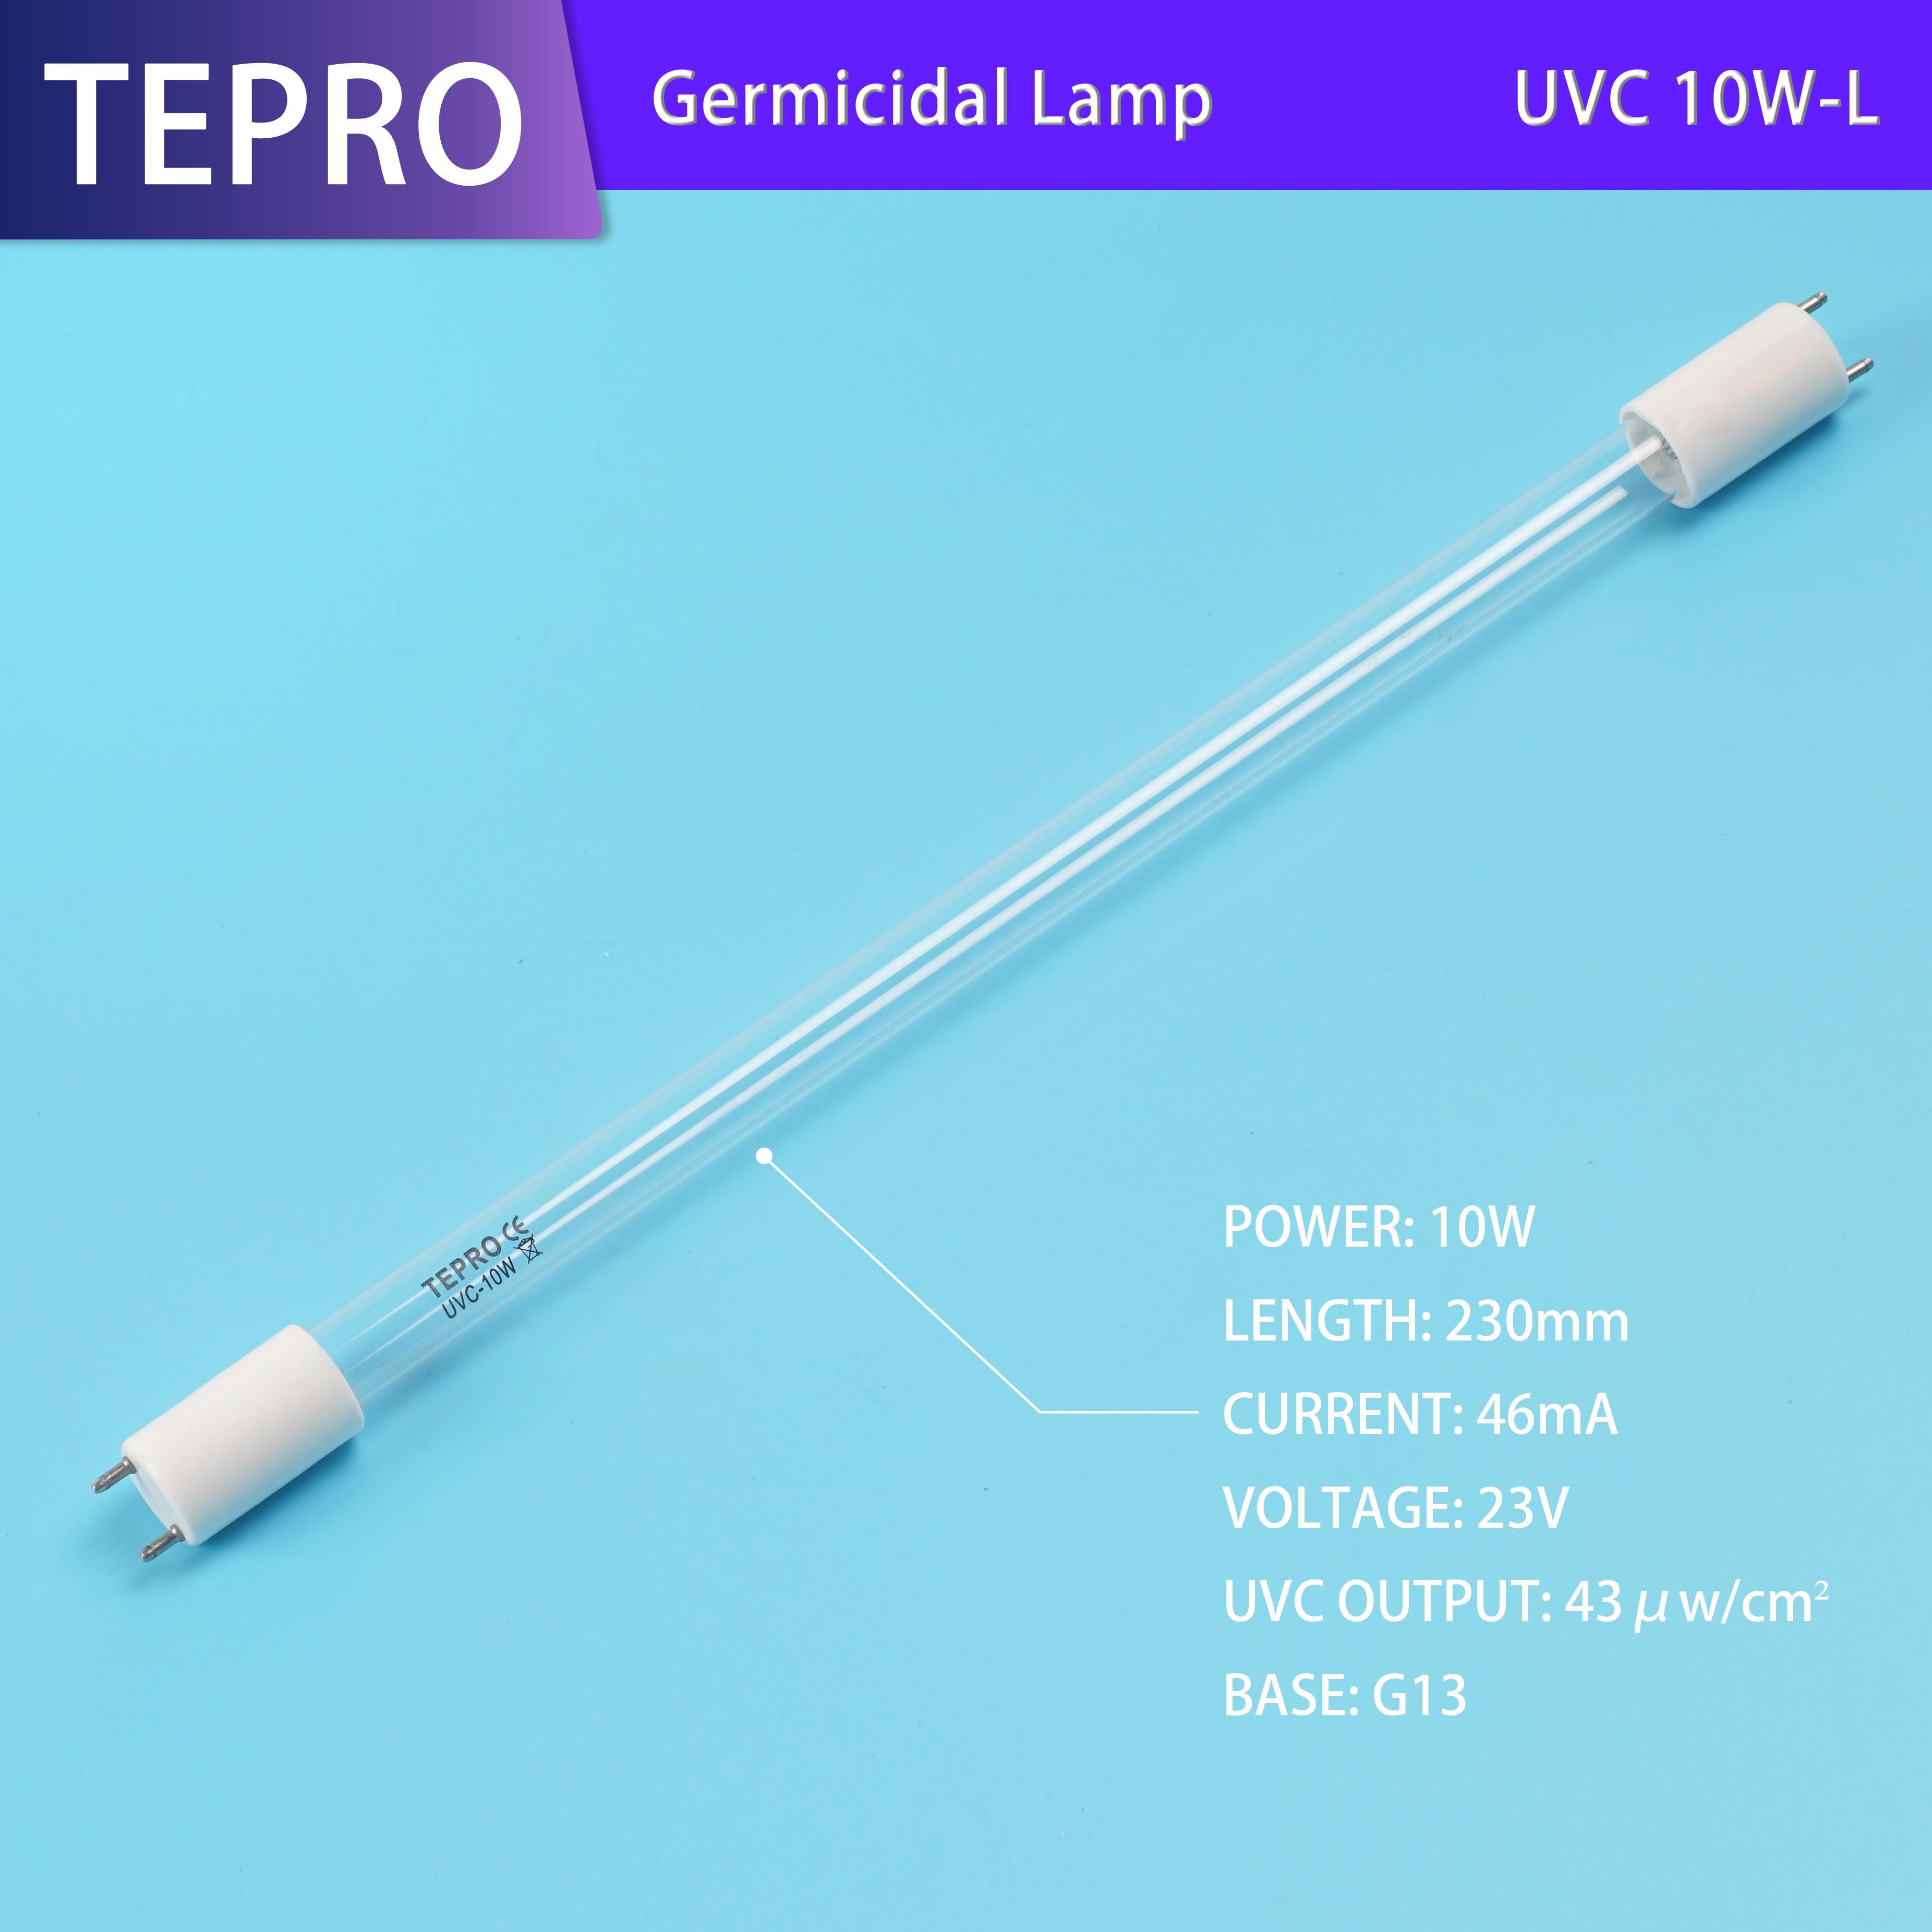 10W Double Ended G5 G13 for sterilization  UVC 10W-L